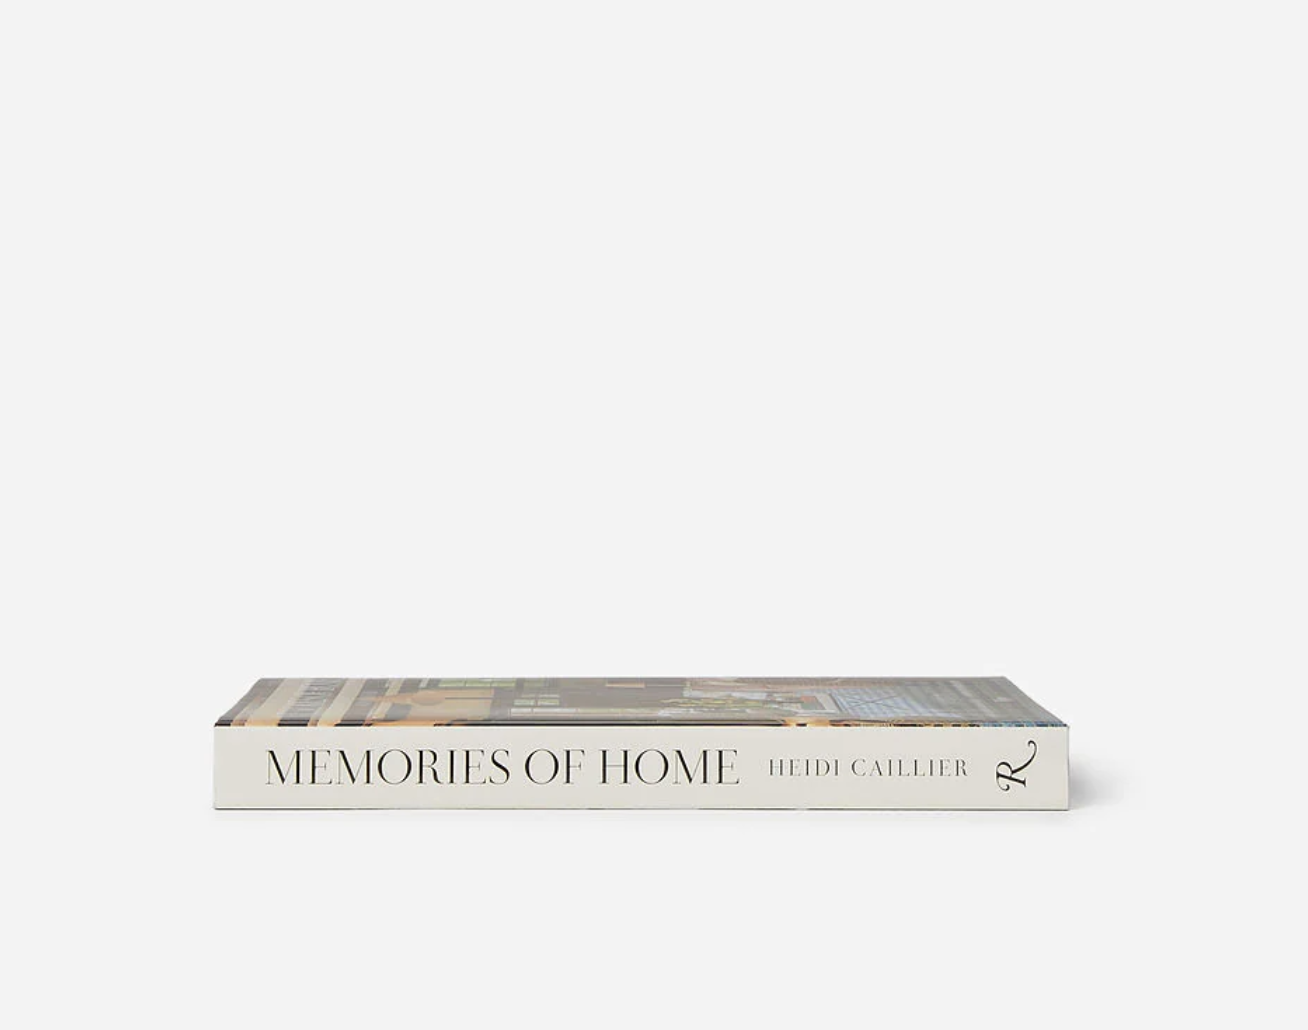 Memories of Home by Heidi Caillier